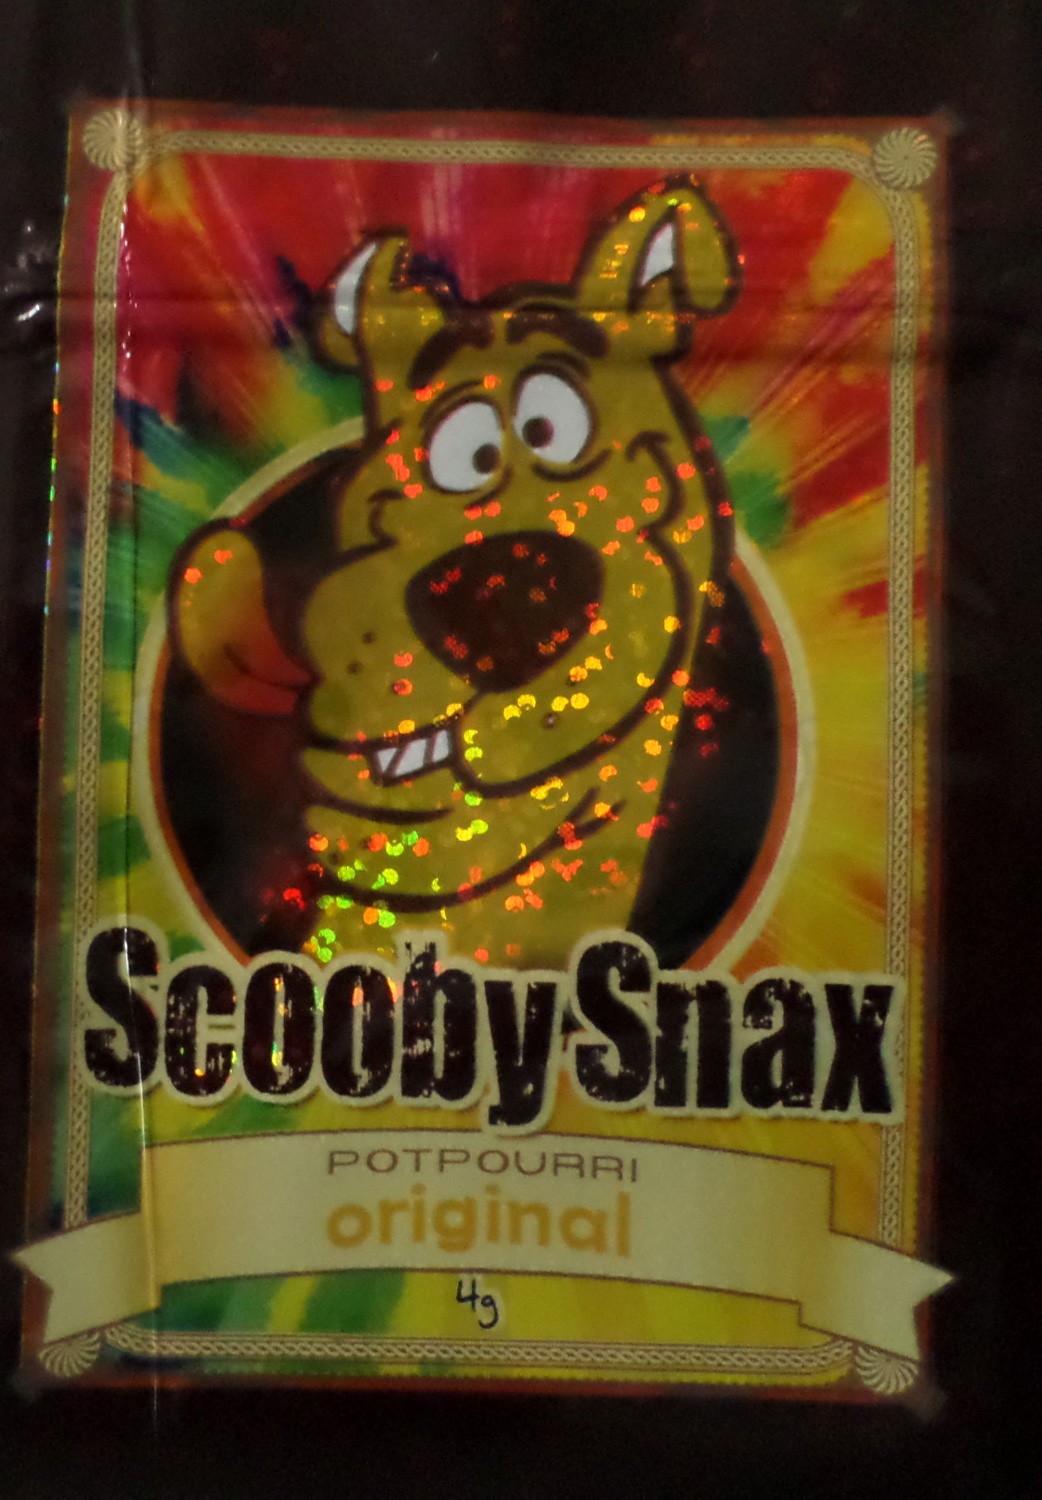 Scooby Snax 2 4g incense 3x pack